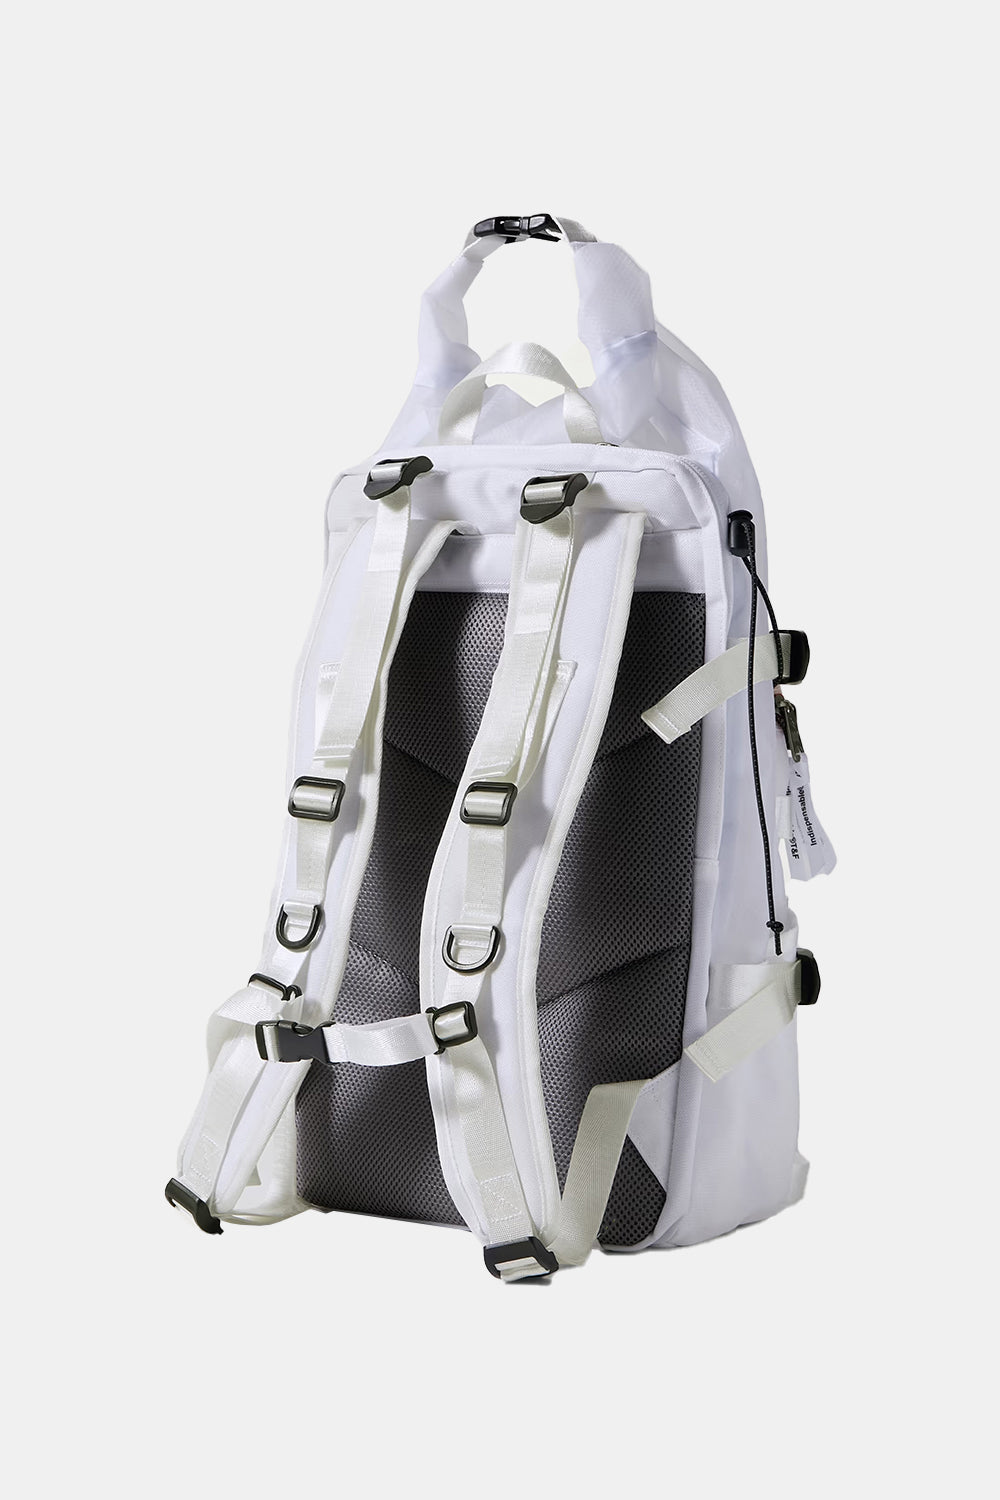 Indispensable IDP Backpack Radd St - Clear